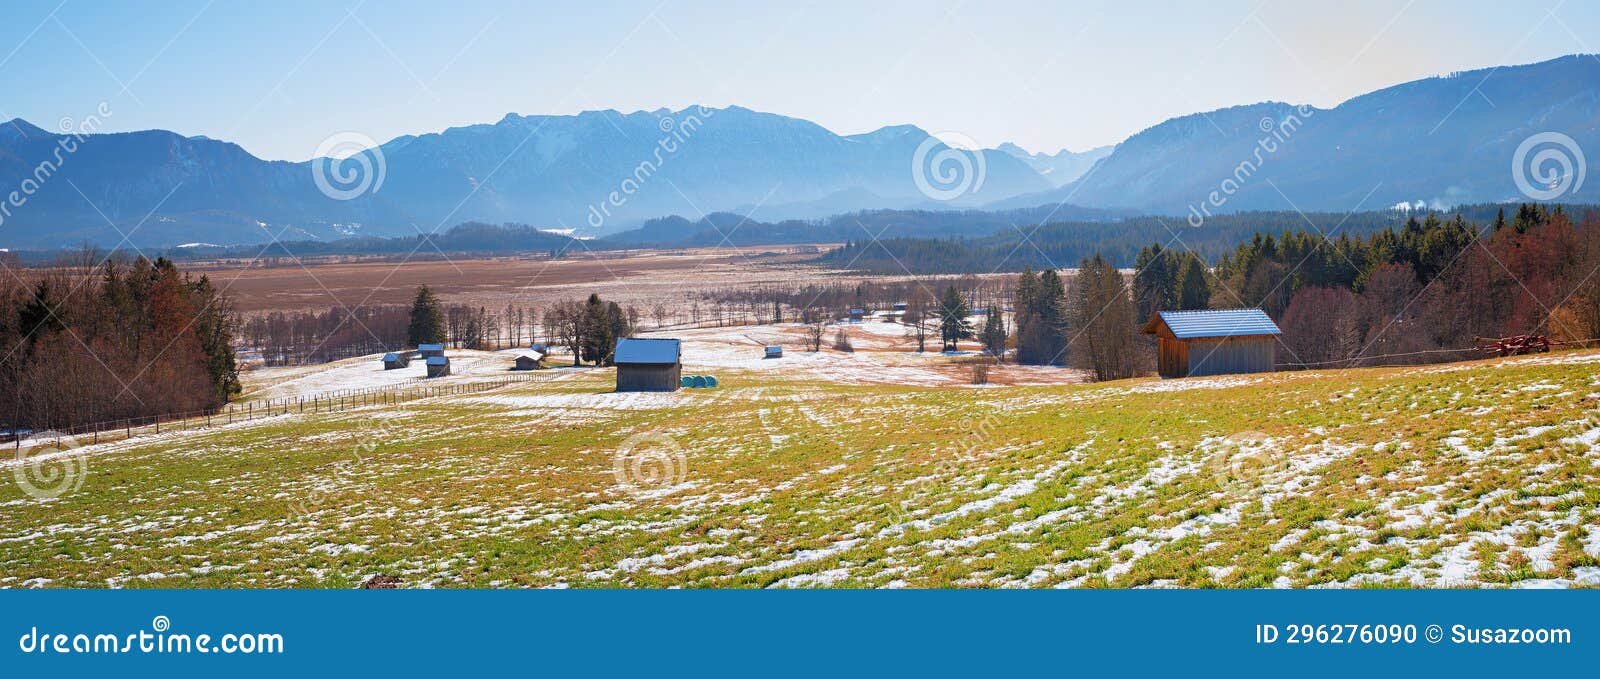 frosty moor landscape murnauer moos and bavarian alps